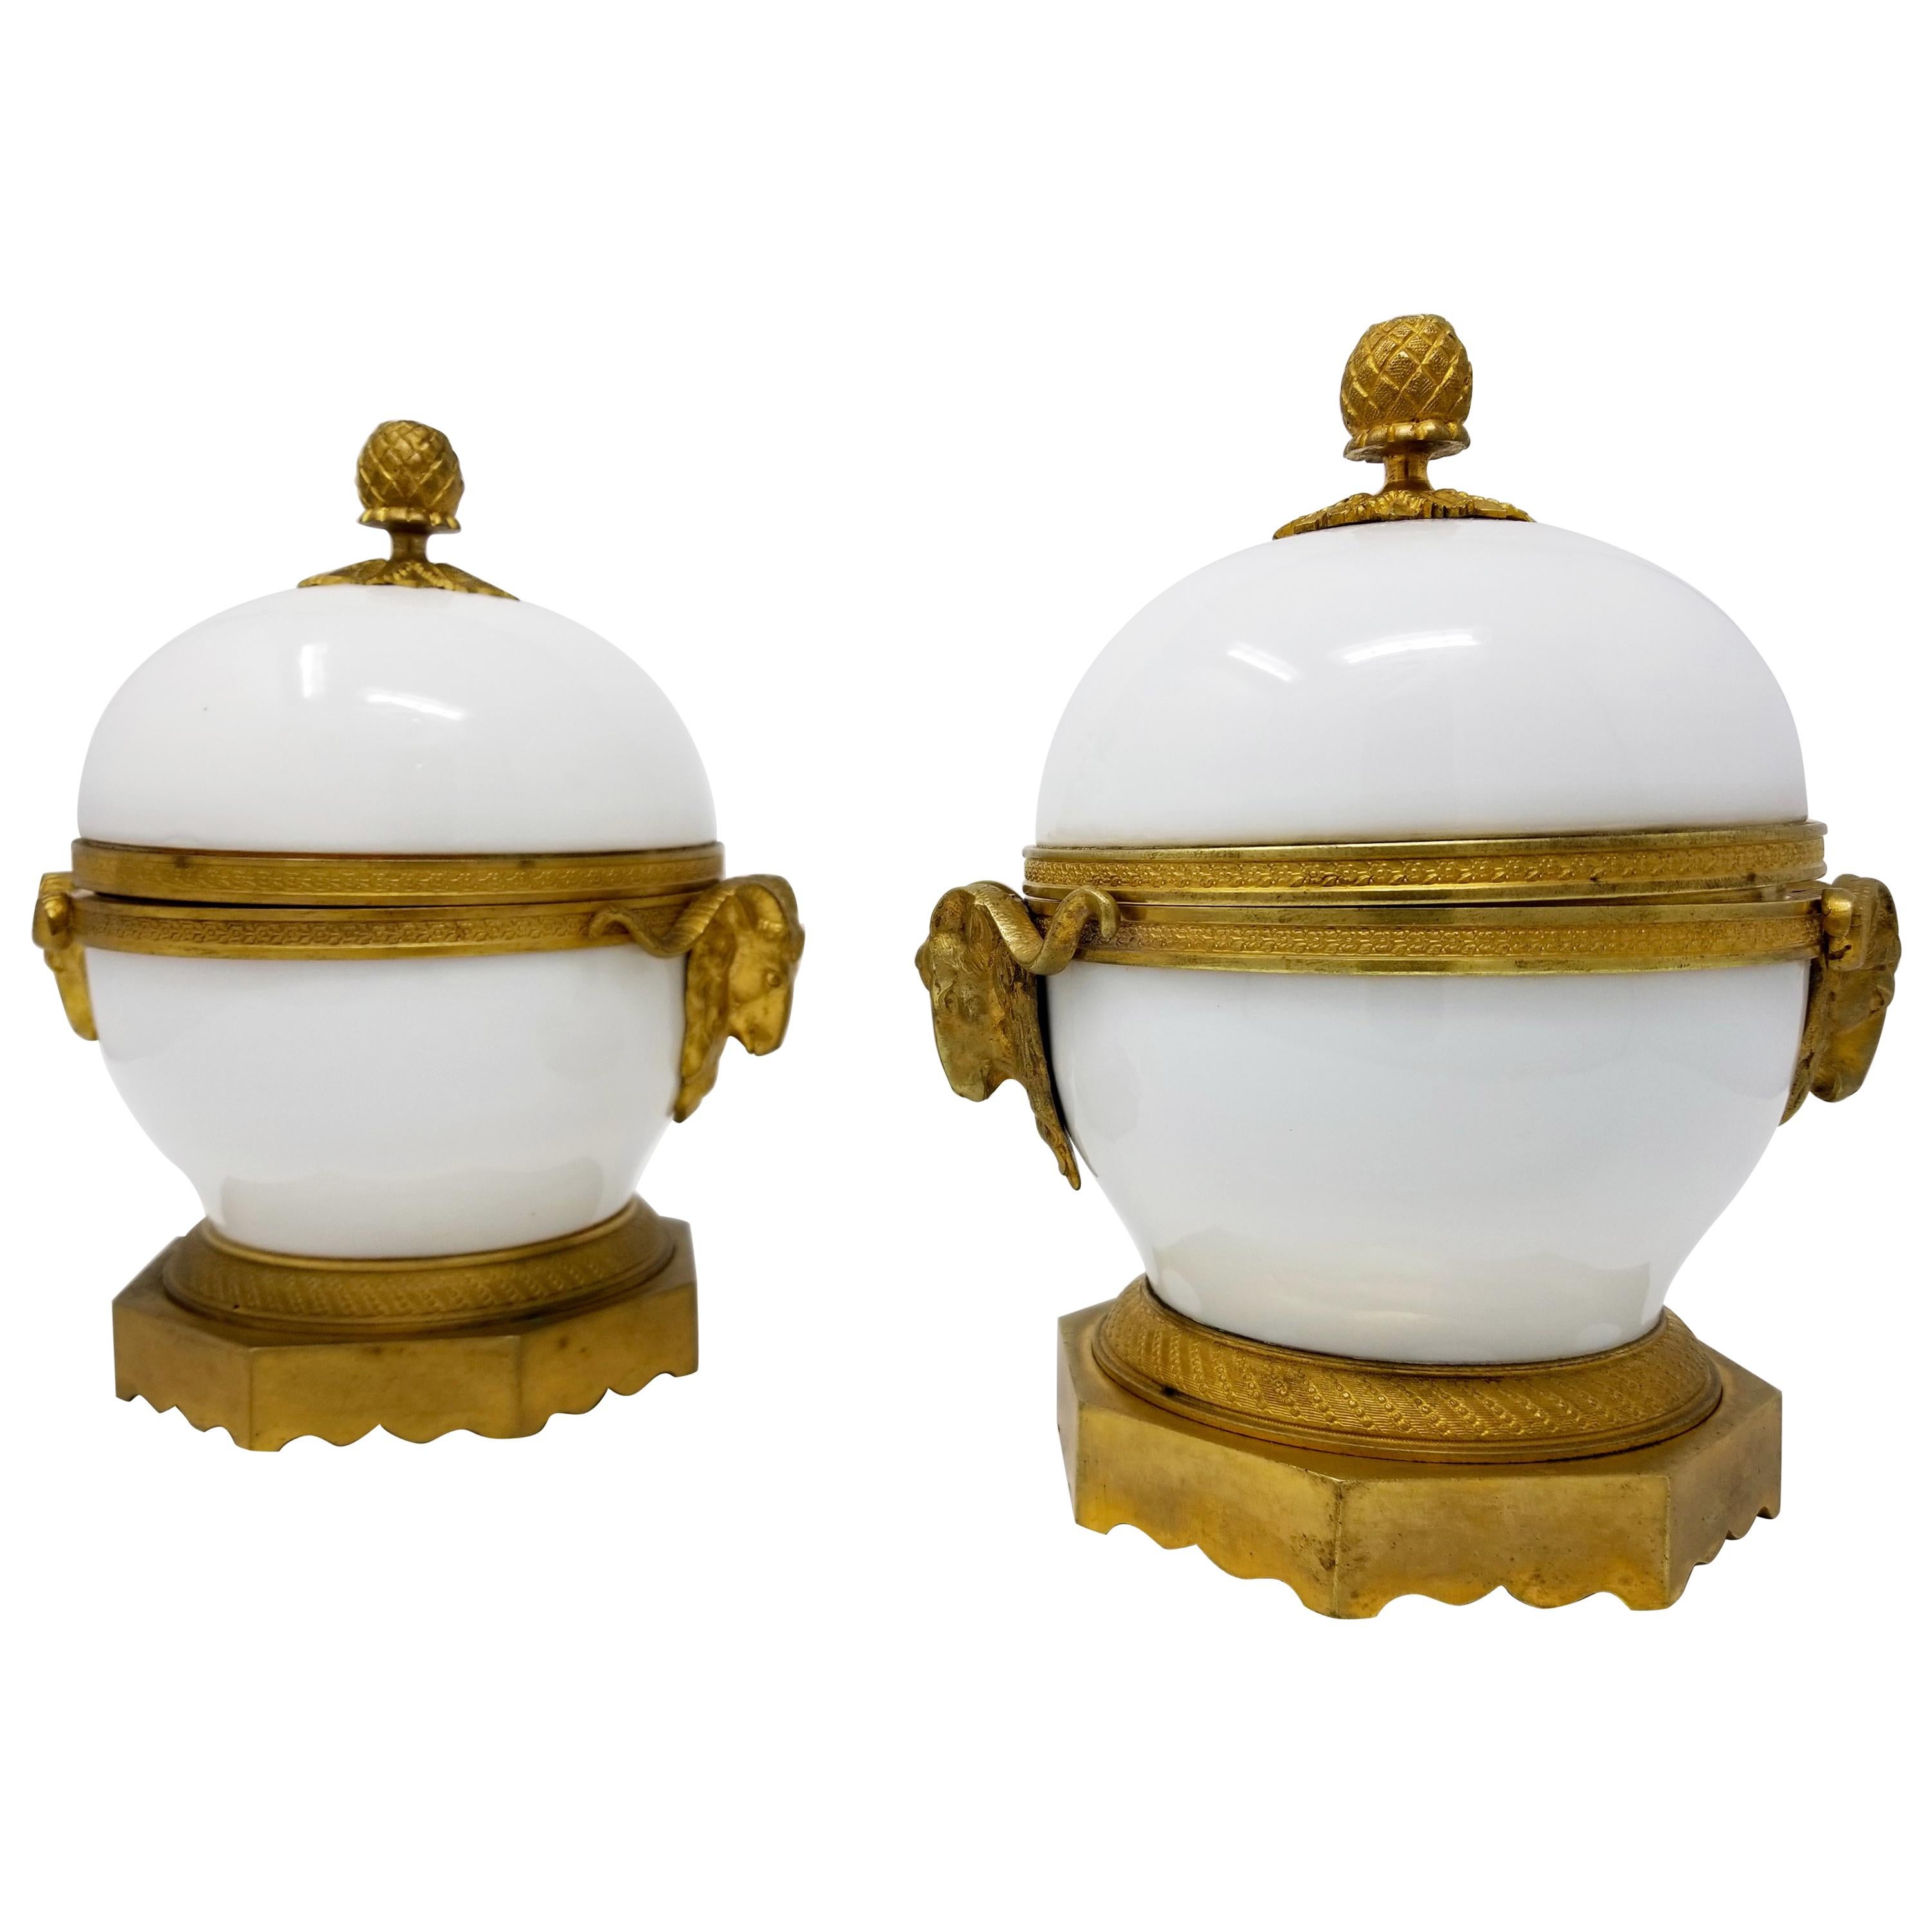 Pair of Louis XVI Ormolu Mounted White Porcelain and Dore Bronze Covered Bowls For Sale